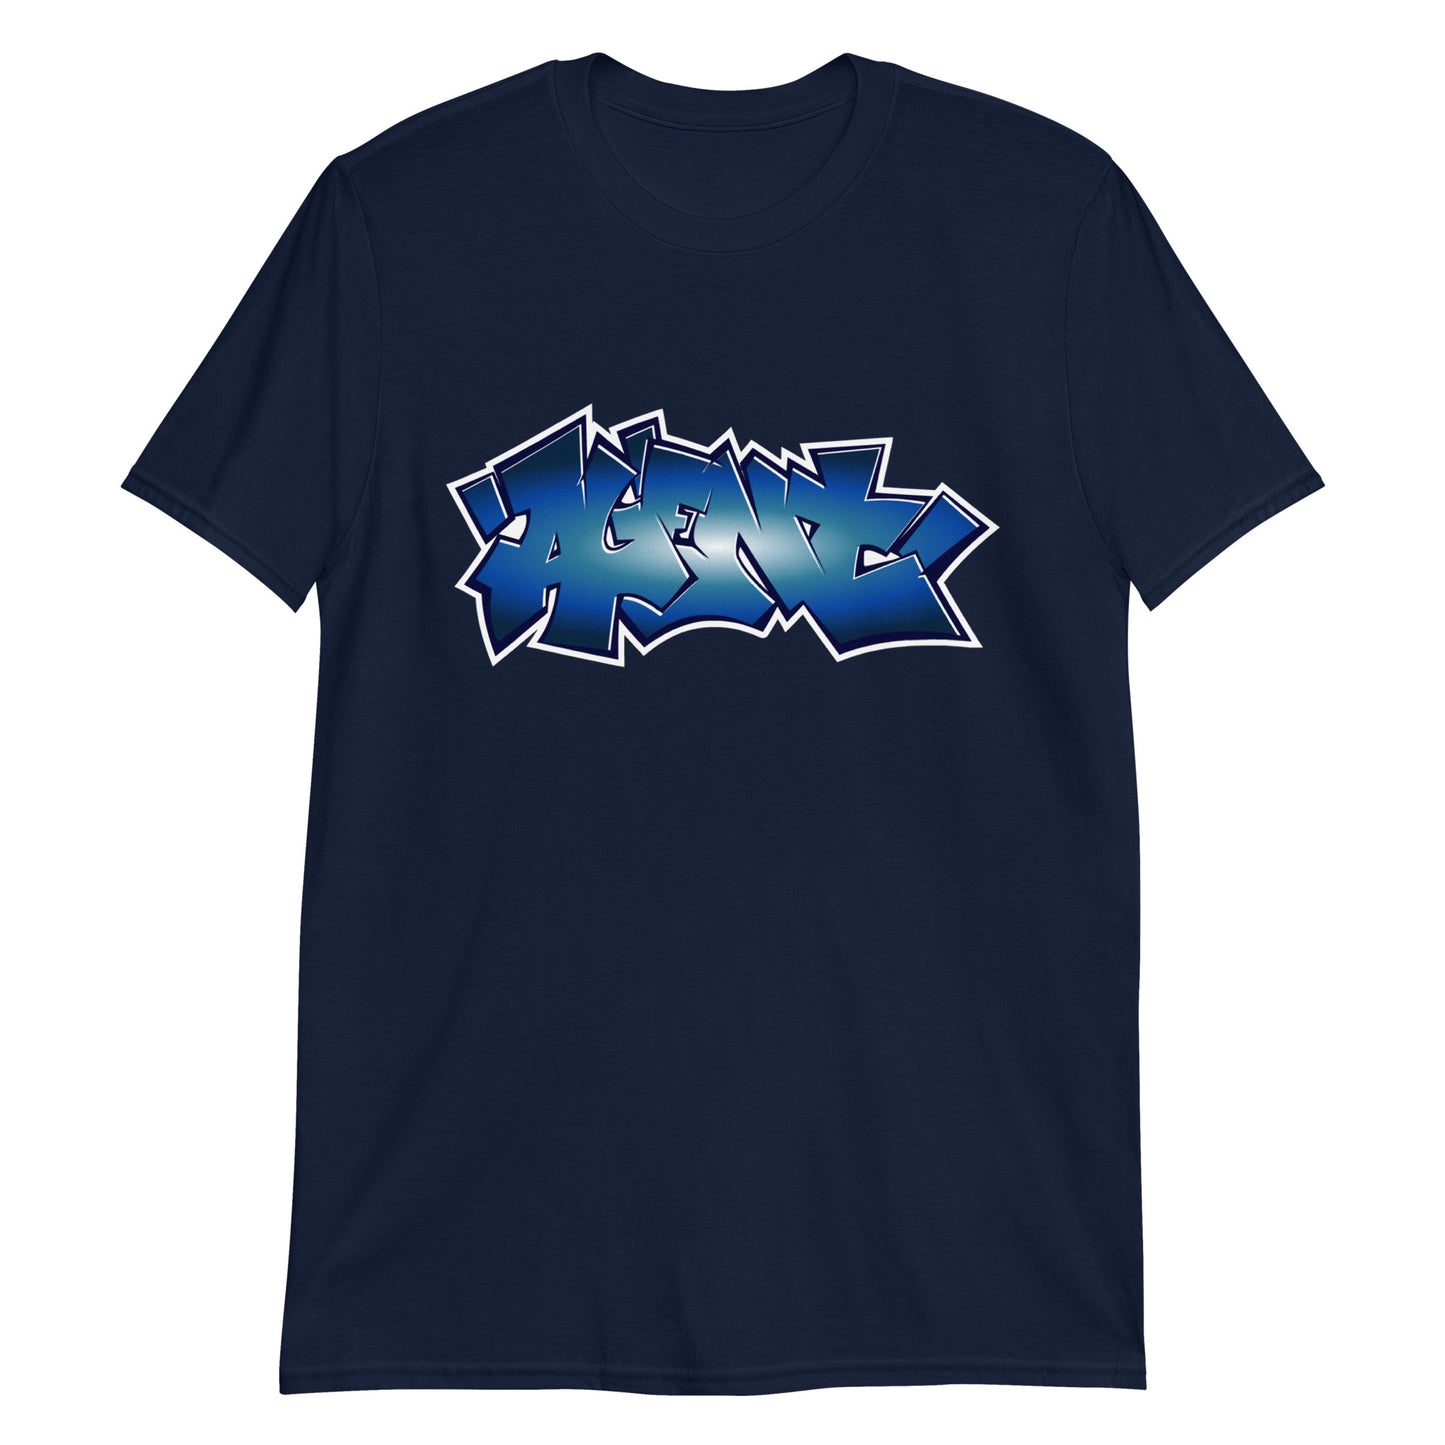 Agent Blue Tag T-shirt -Discount Tee